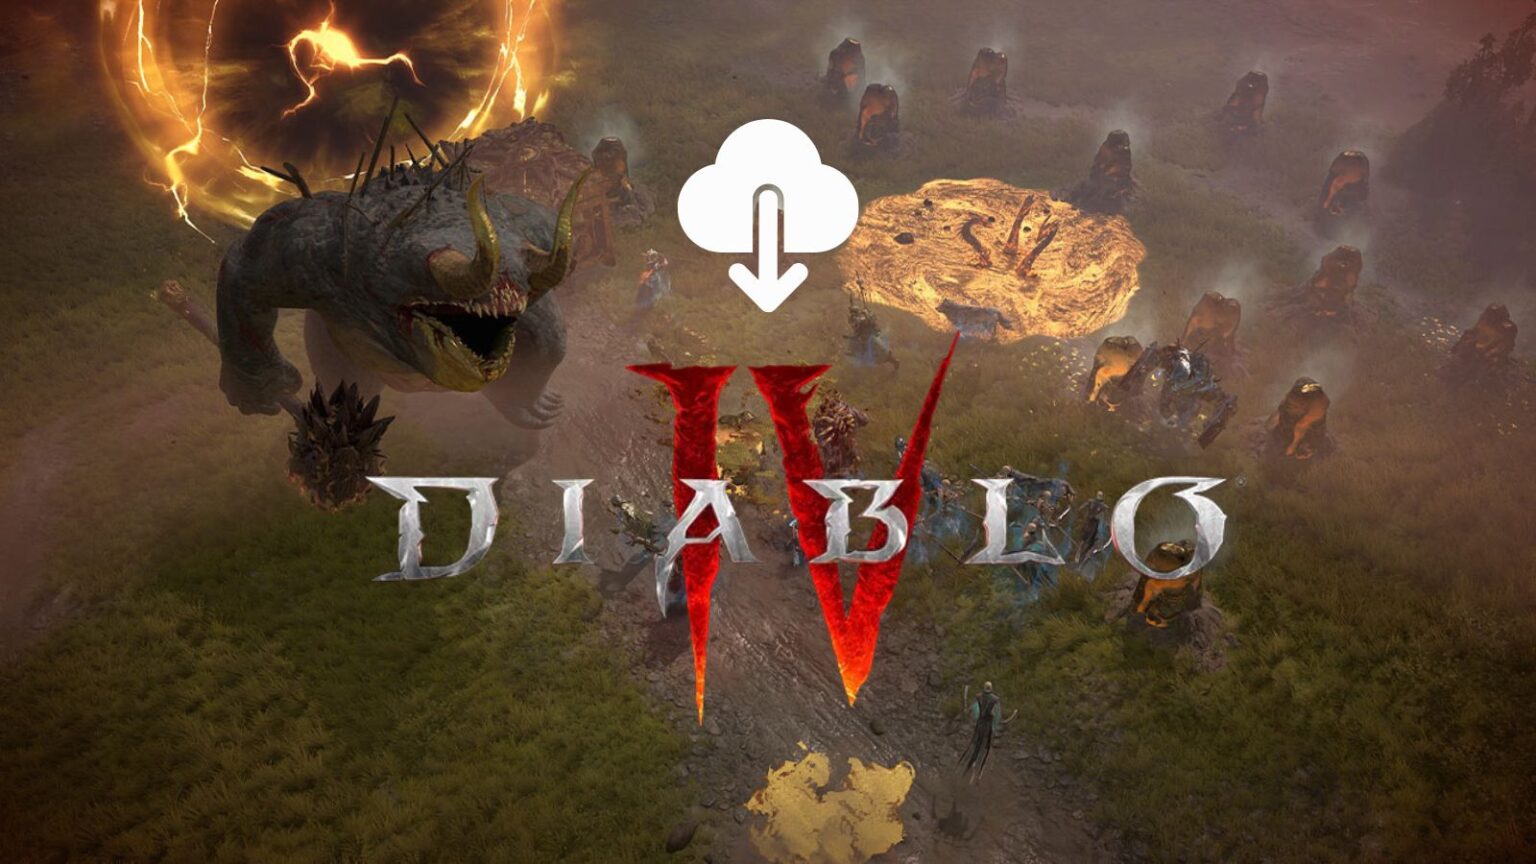 download diablo 3 ps 4 for free